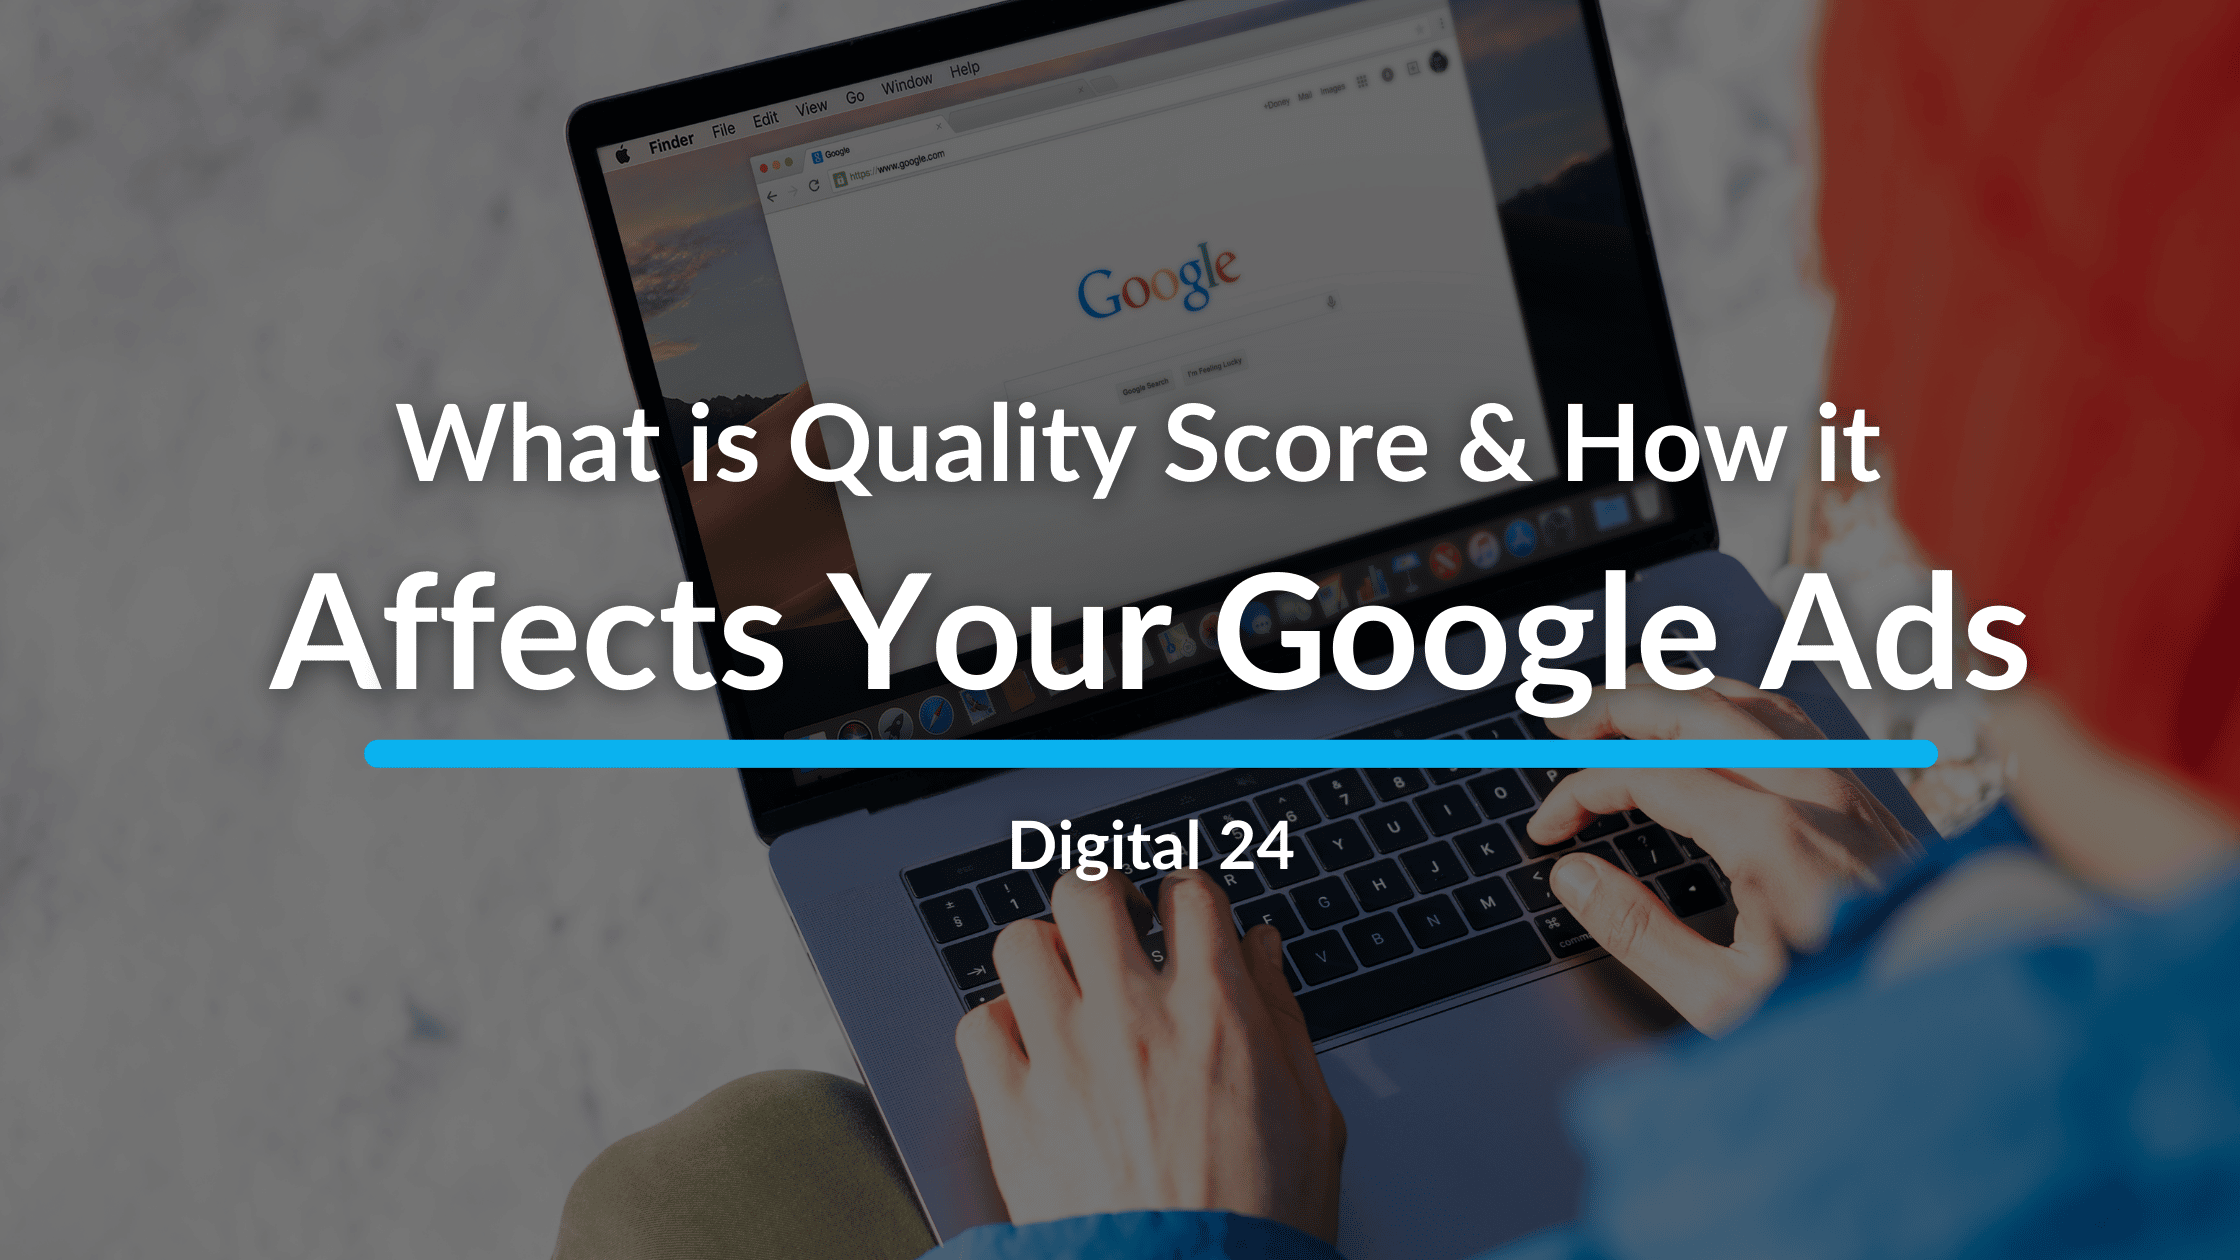 What is Quality Score & how it affects your Google ads?